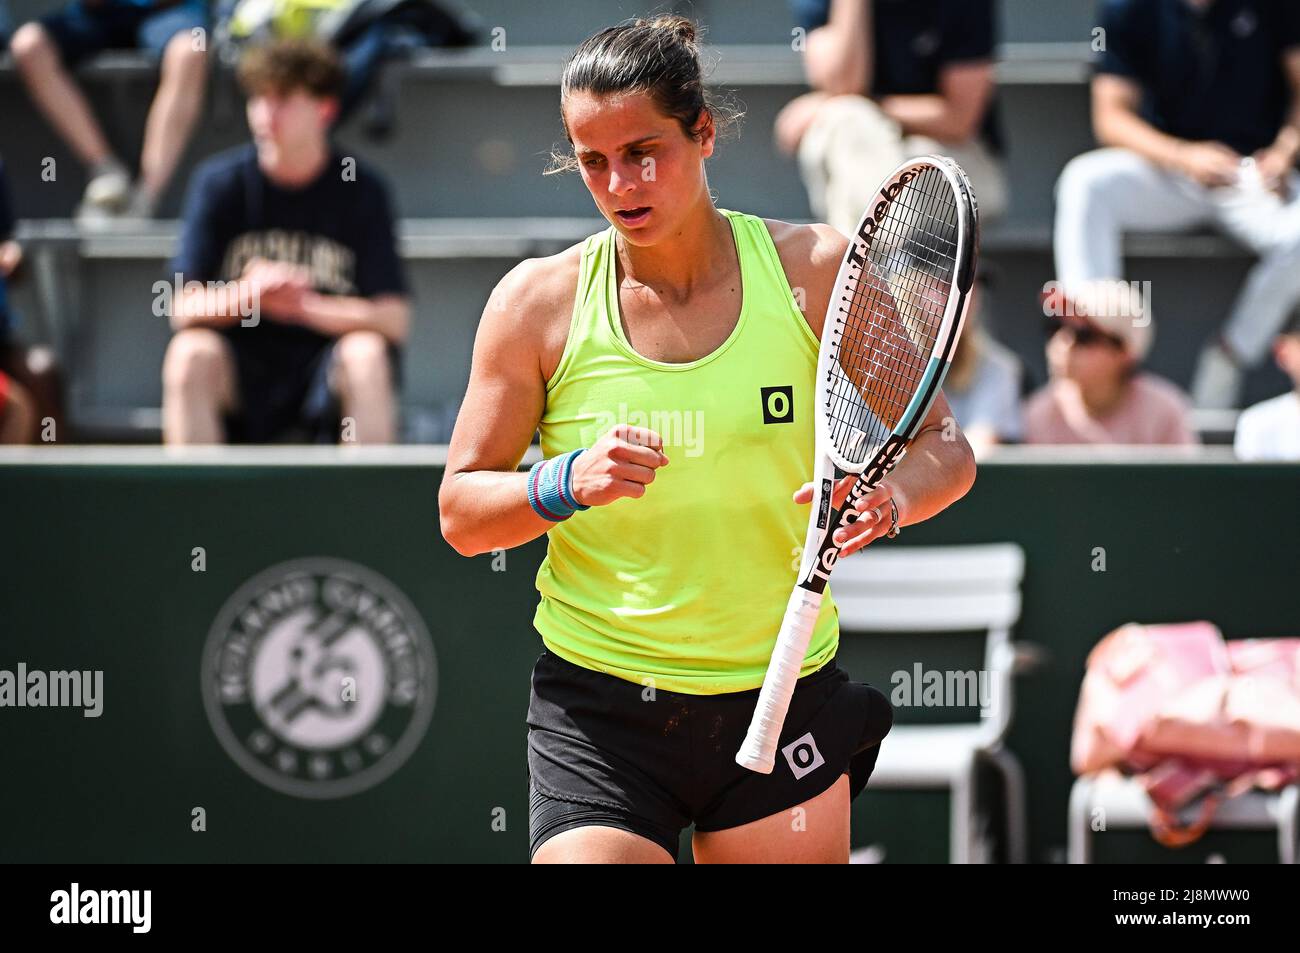 May 17, 2022, Paris, France: Alice RAME of France celebrates his point  during the Qualifying Day two of Roland-Garros 2022, French Open 2022,  Grand Slam tennis tournament on May 17, 2022 at